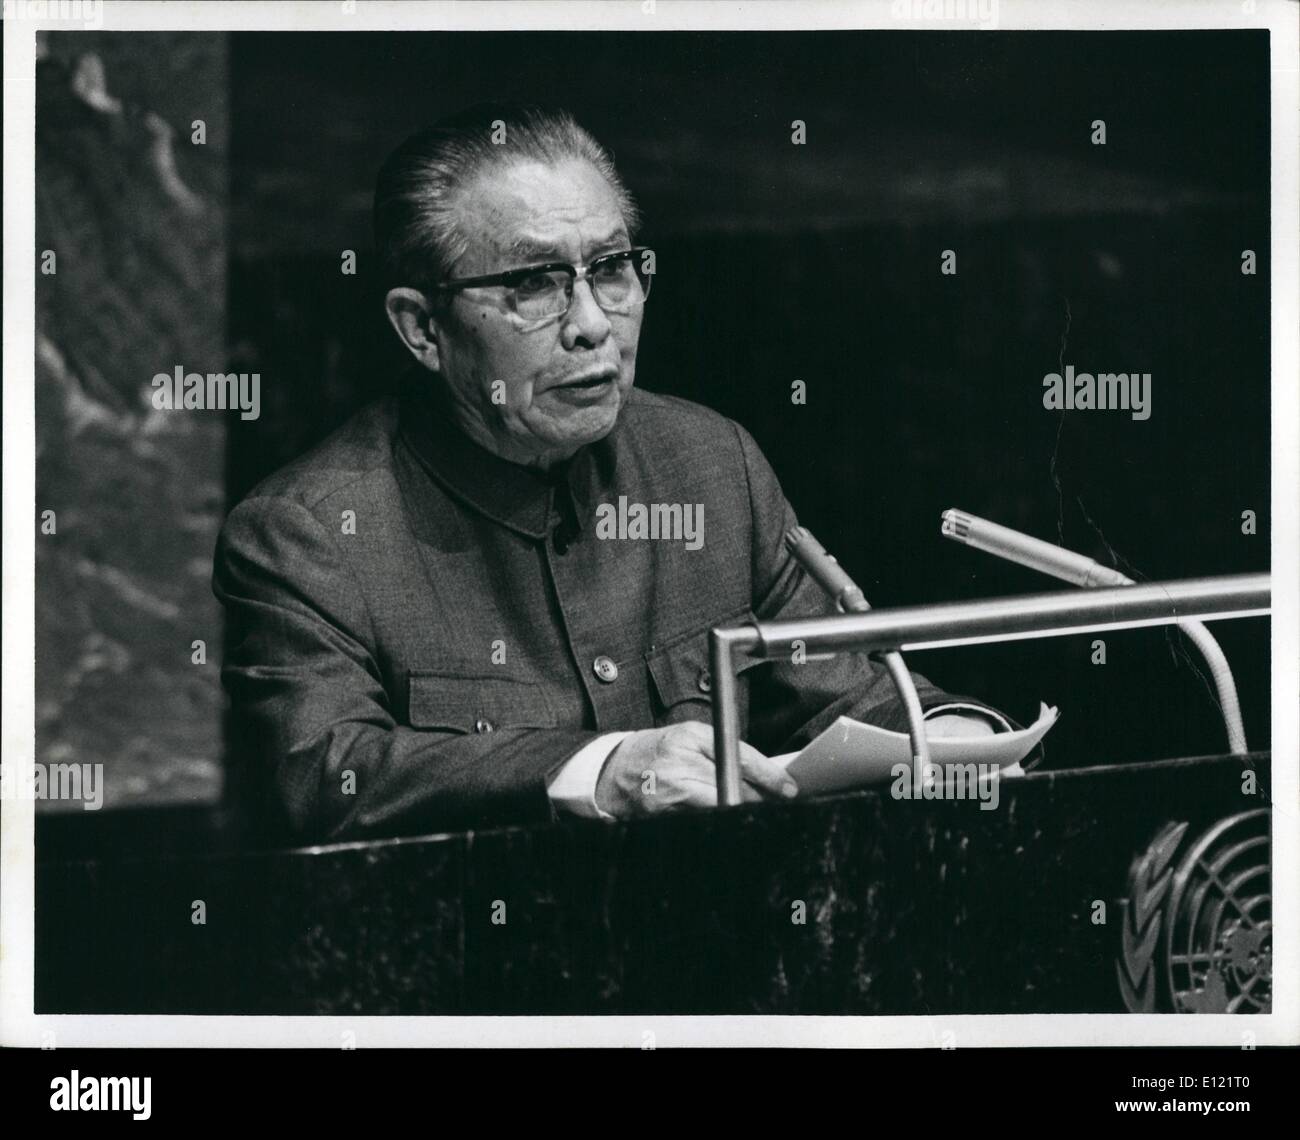 Oct. 10, 1982 - The United Nations New York City: Councillor and minister for Foreign affairs on China, Mr. uang, addressed the 37th session of the General assembly in New York today. Photo Shows Mr. Huang Hua during this speach. Stock Photo